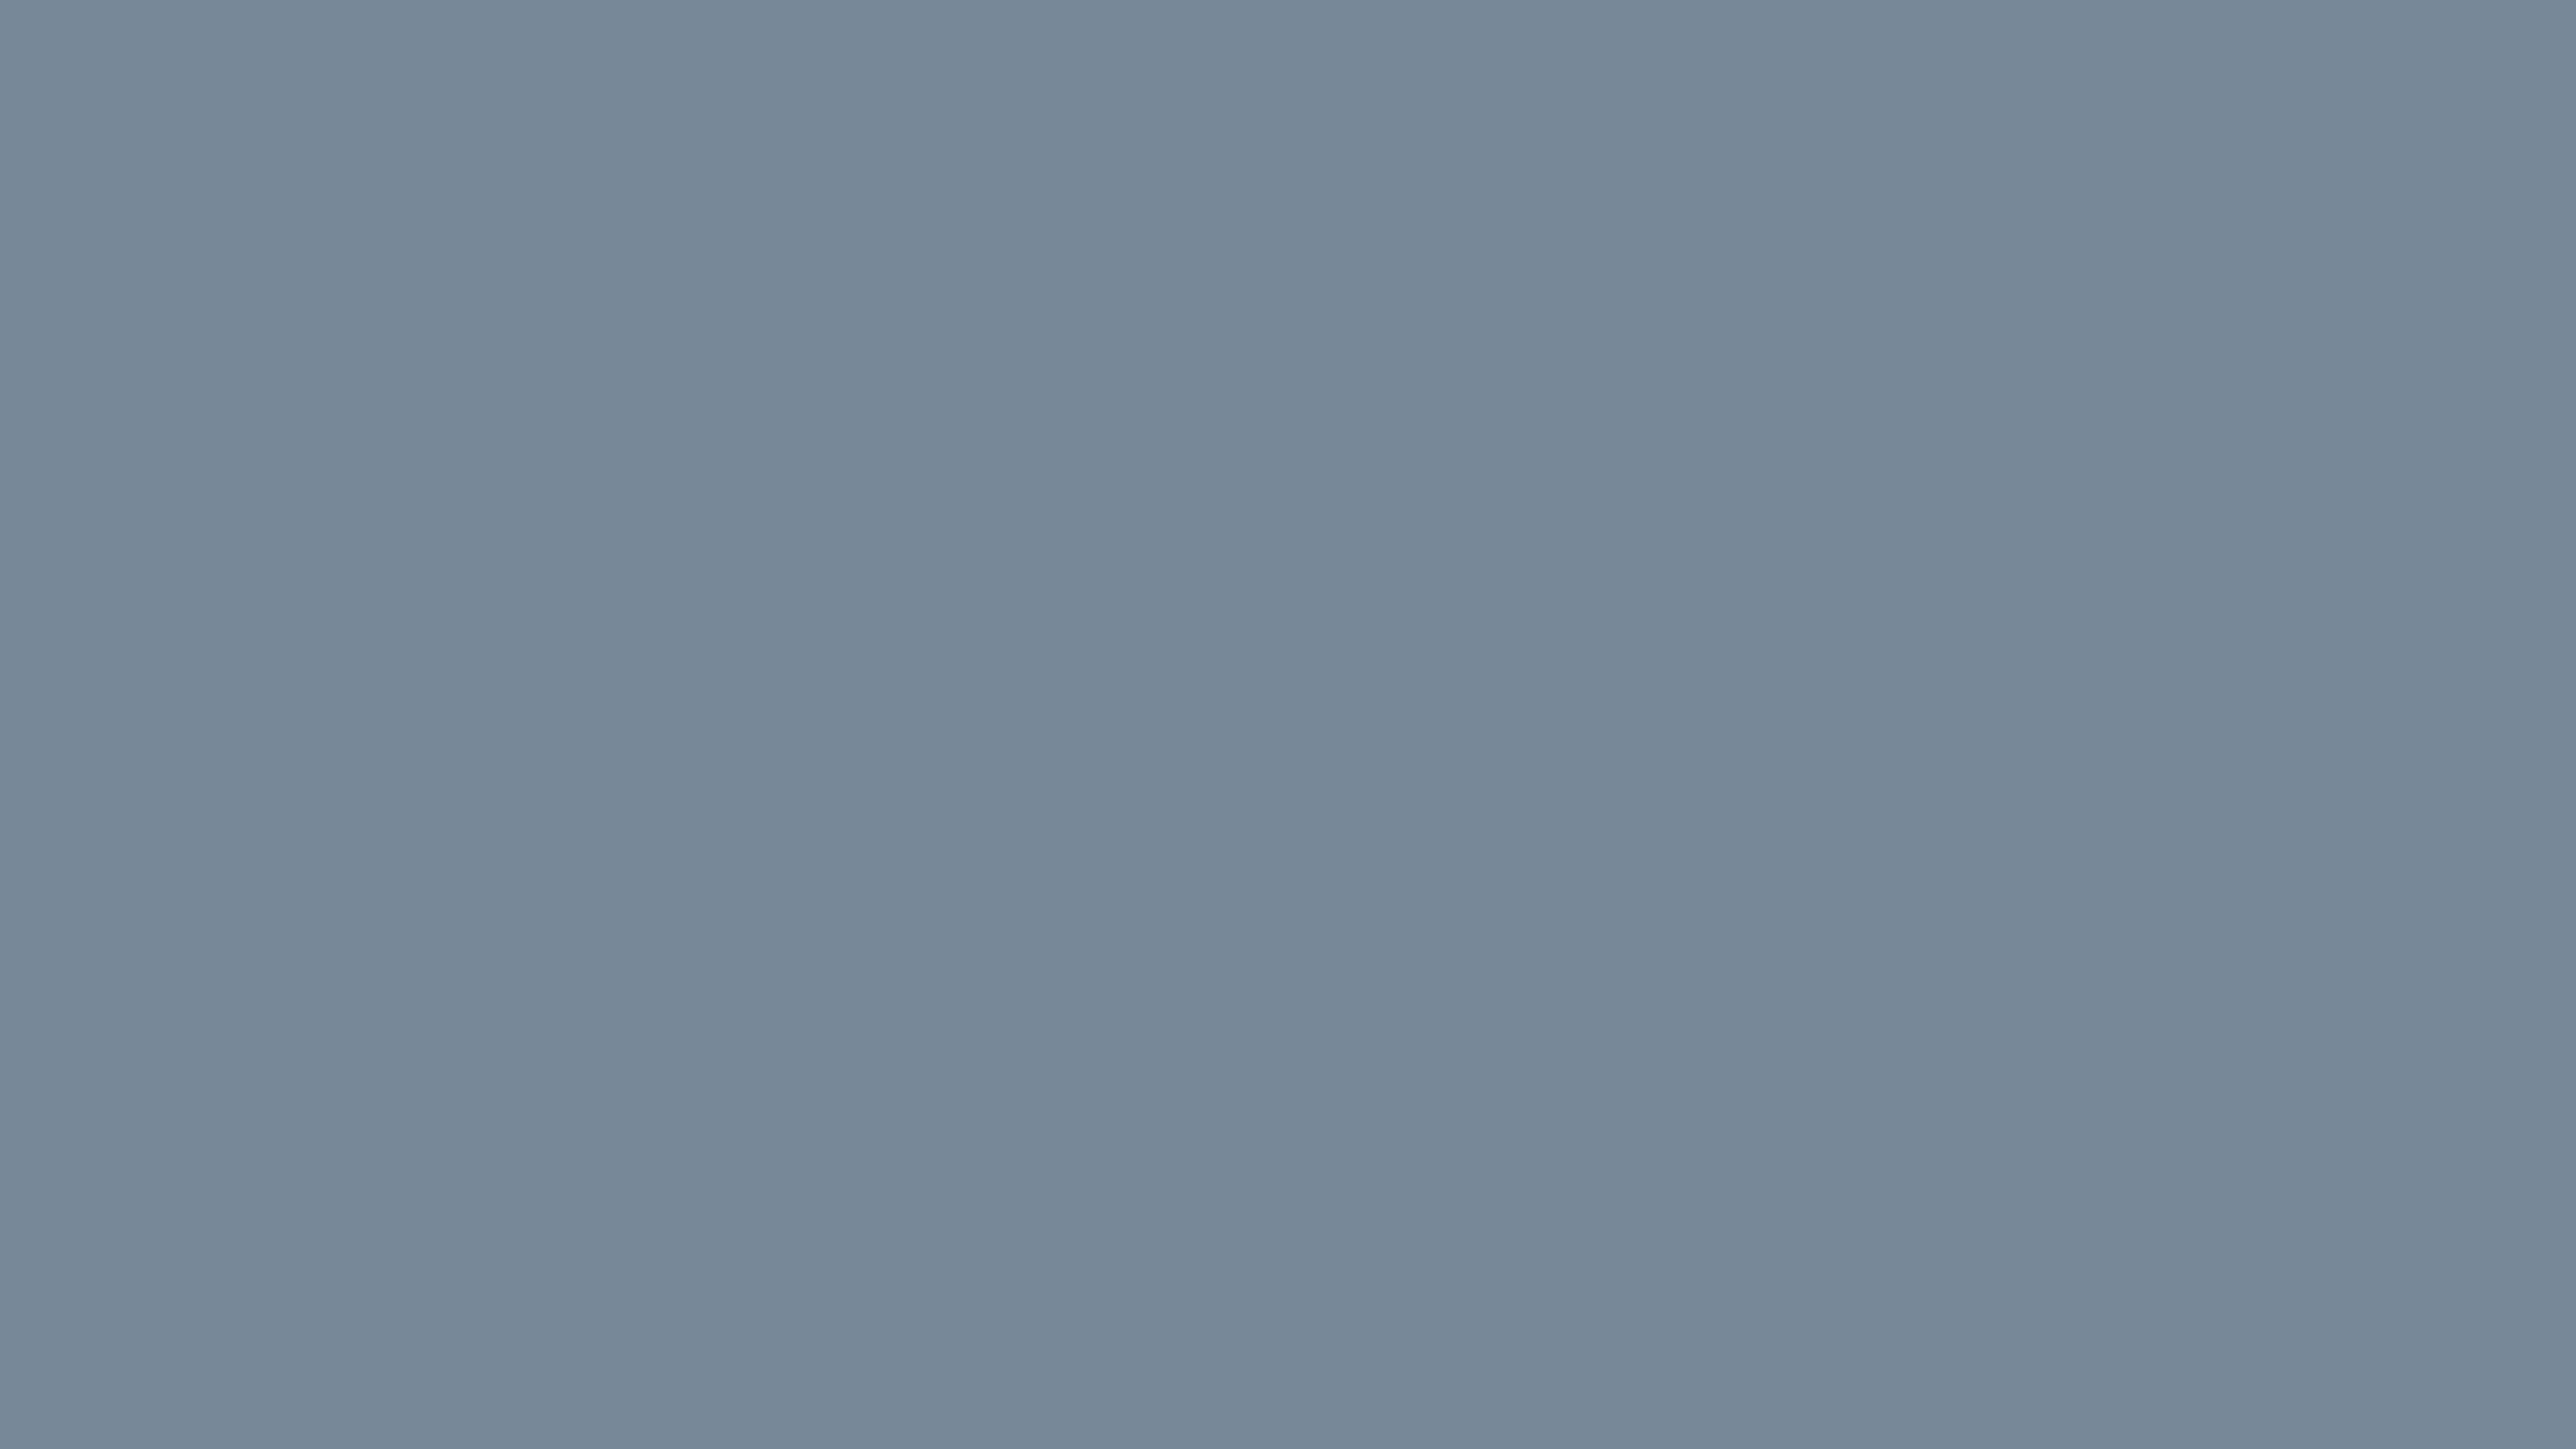 7680x4320 Light Slate Gray Solid Color Background